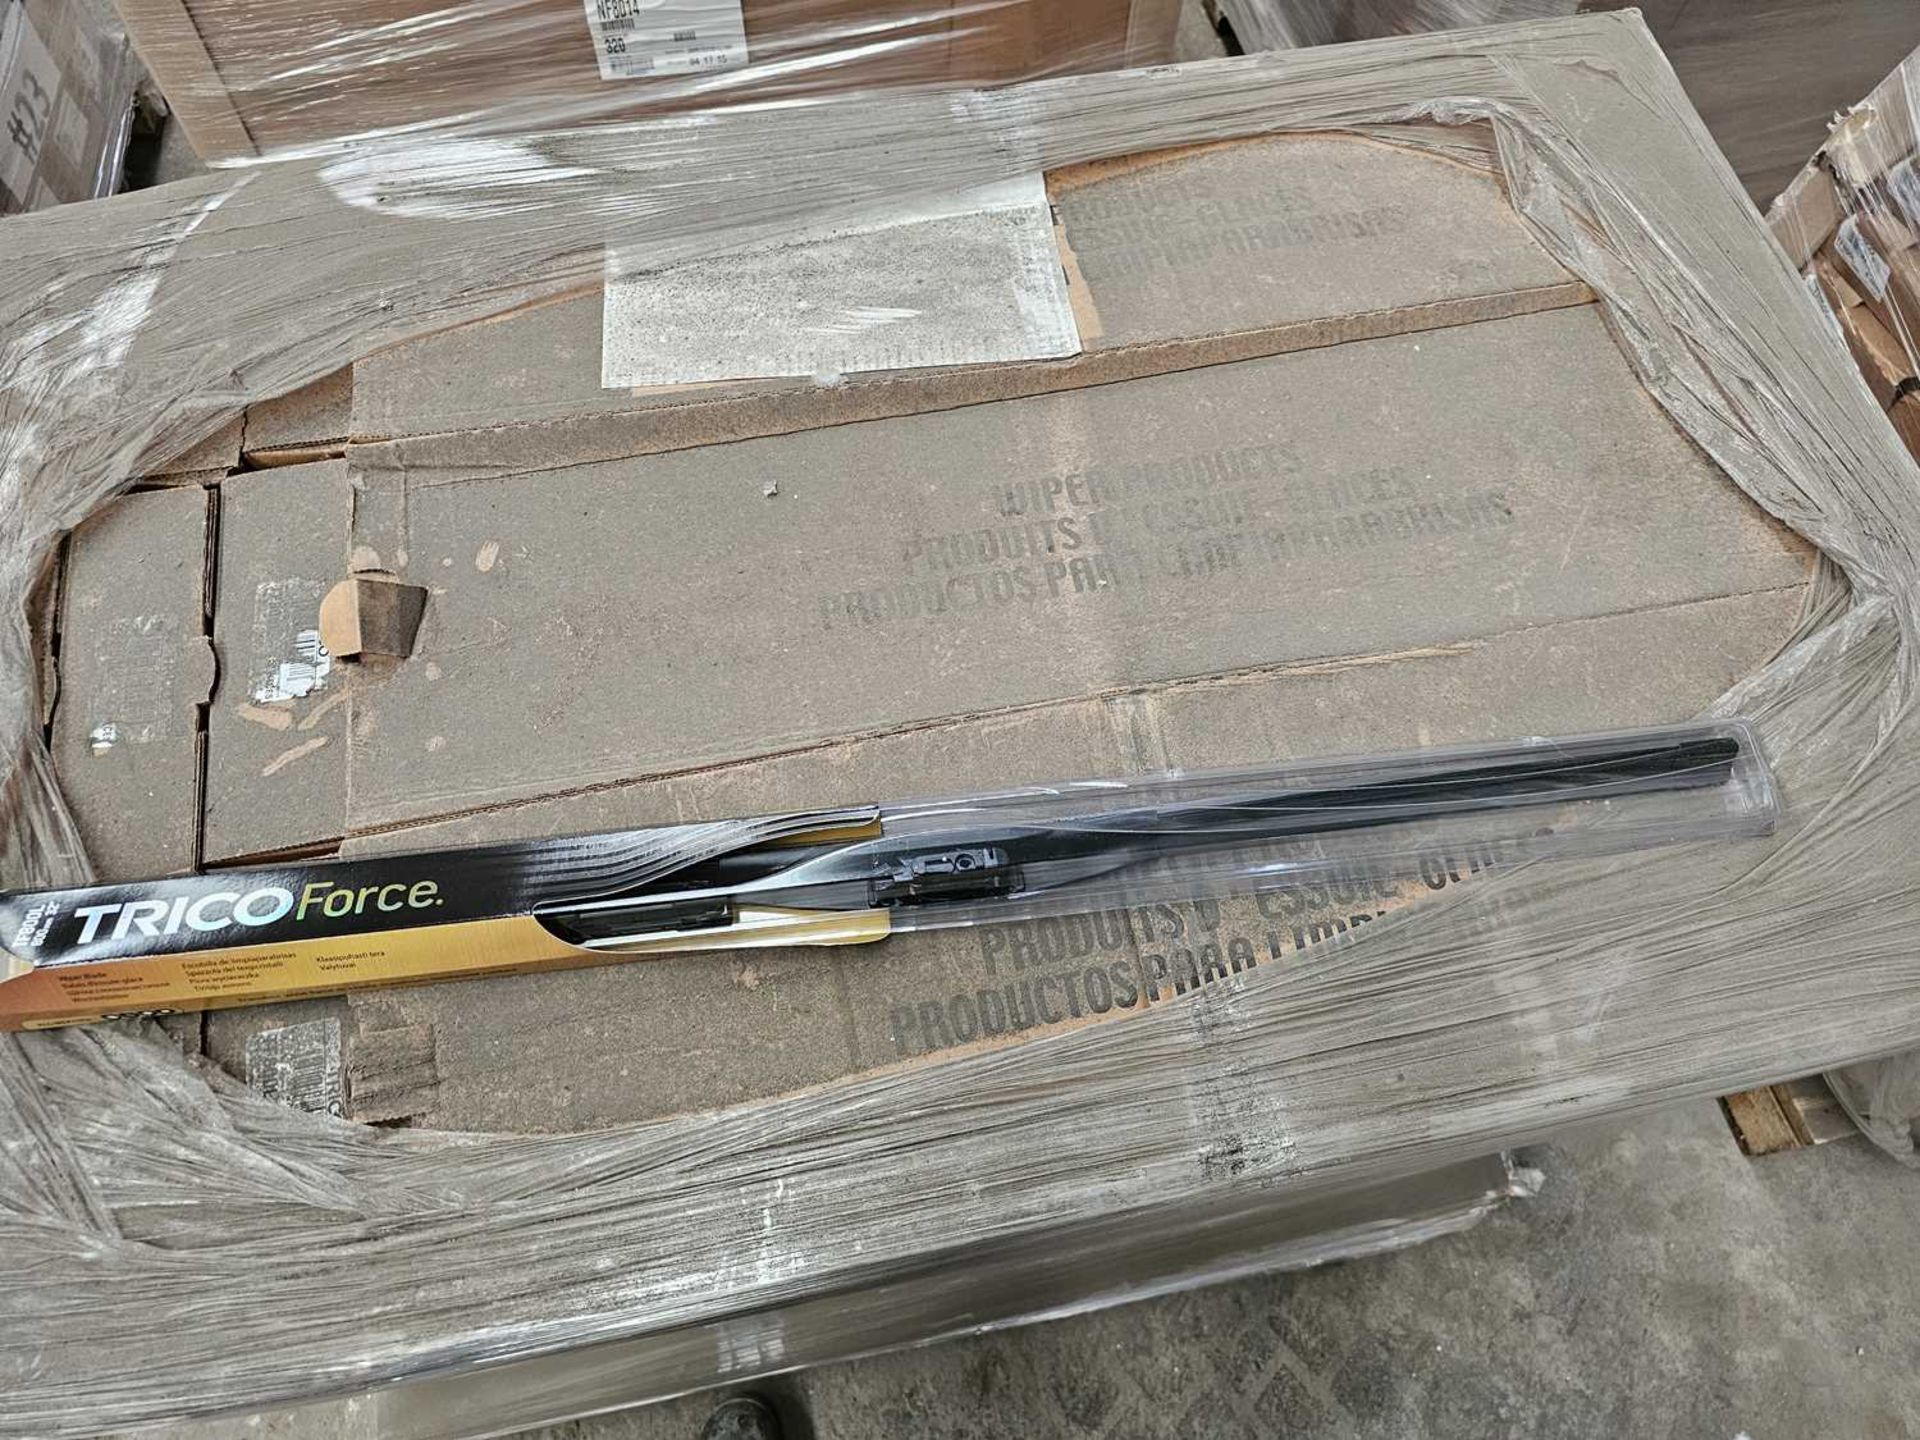 Unused Pallet of Trico TF800L Windscreen Wipers (32")